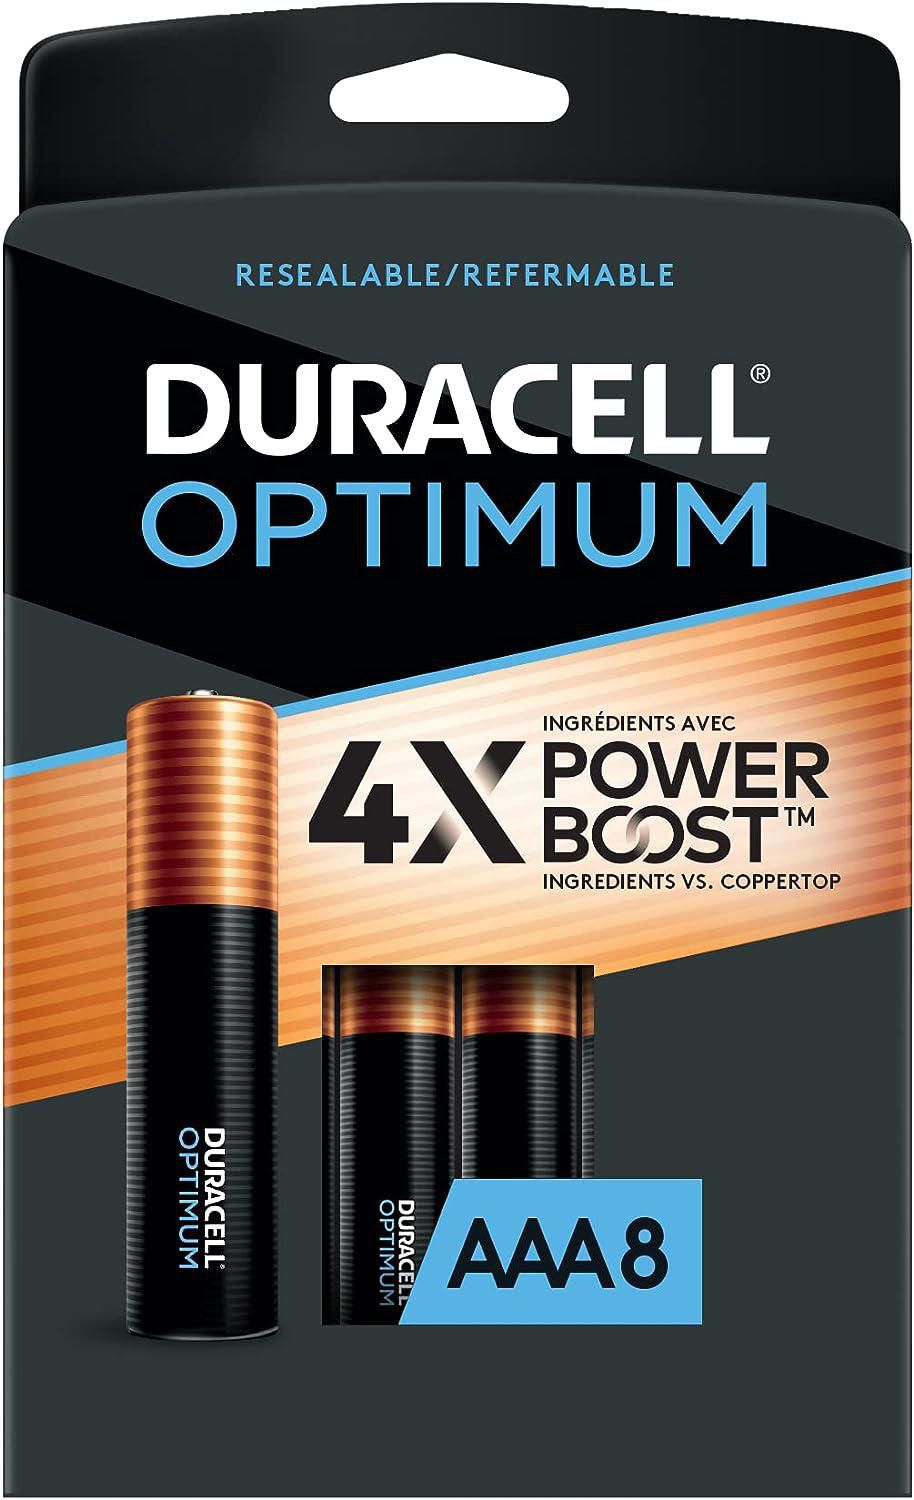 Duracell Optimum AAA Battery with 4X POWER BOOST™, 6 Pack Resealable  Package 